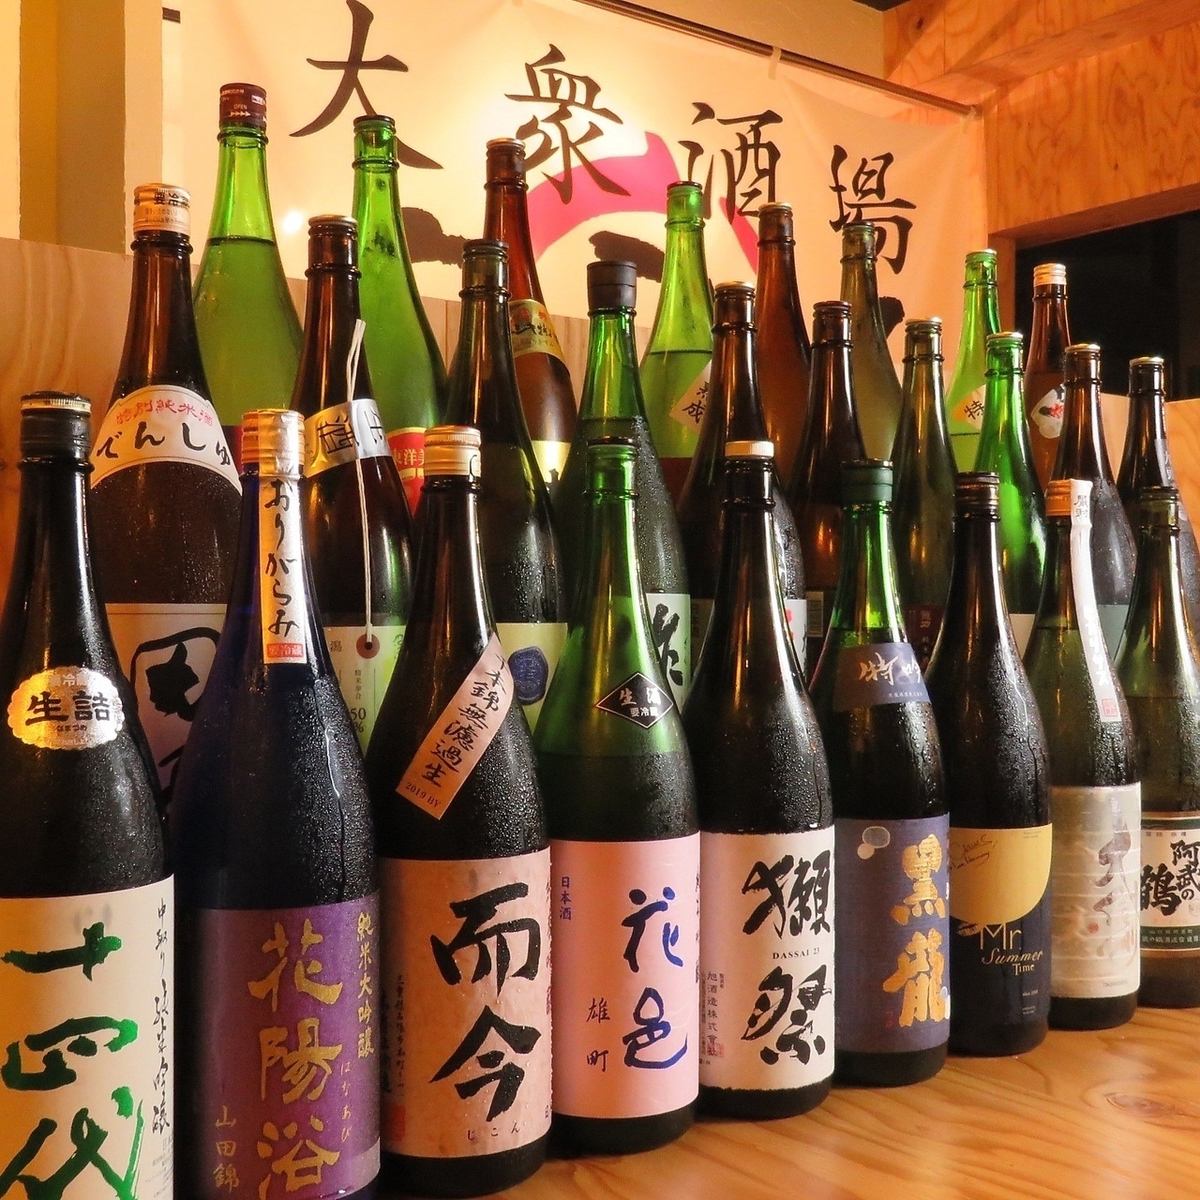 We always have rare sake with high value! With delicious side dishes ...